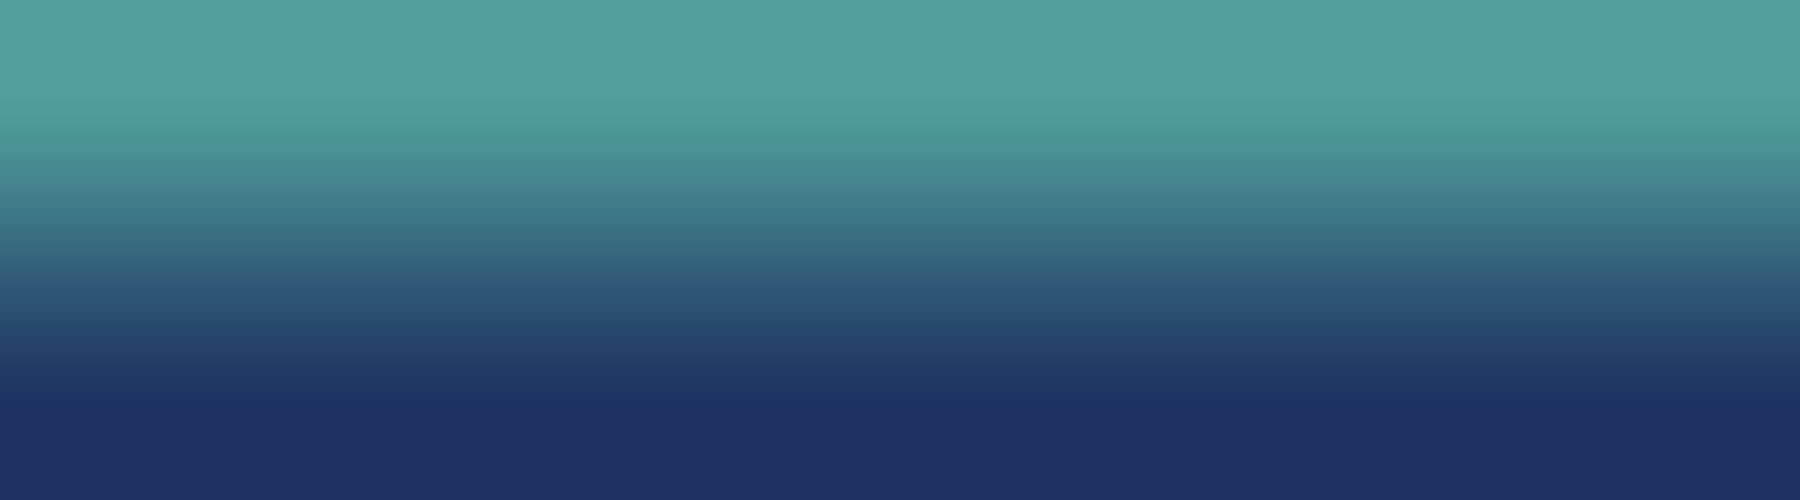 turquoise and navy blue bg